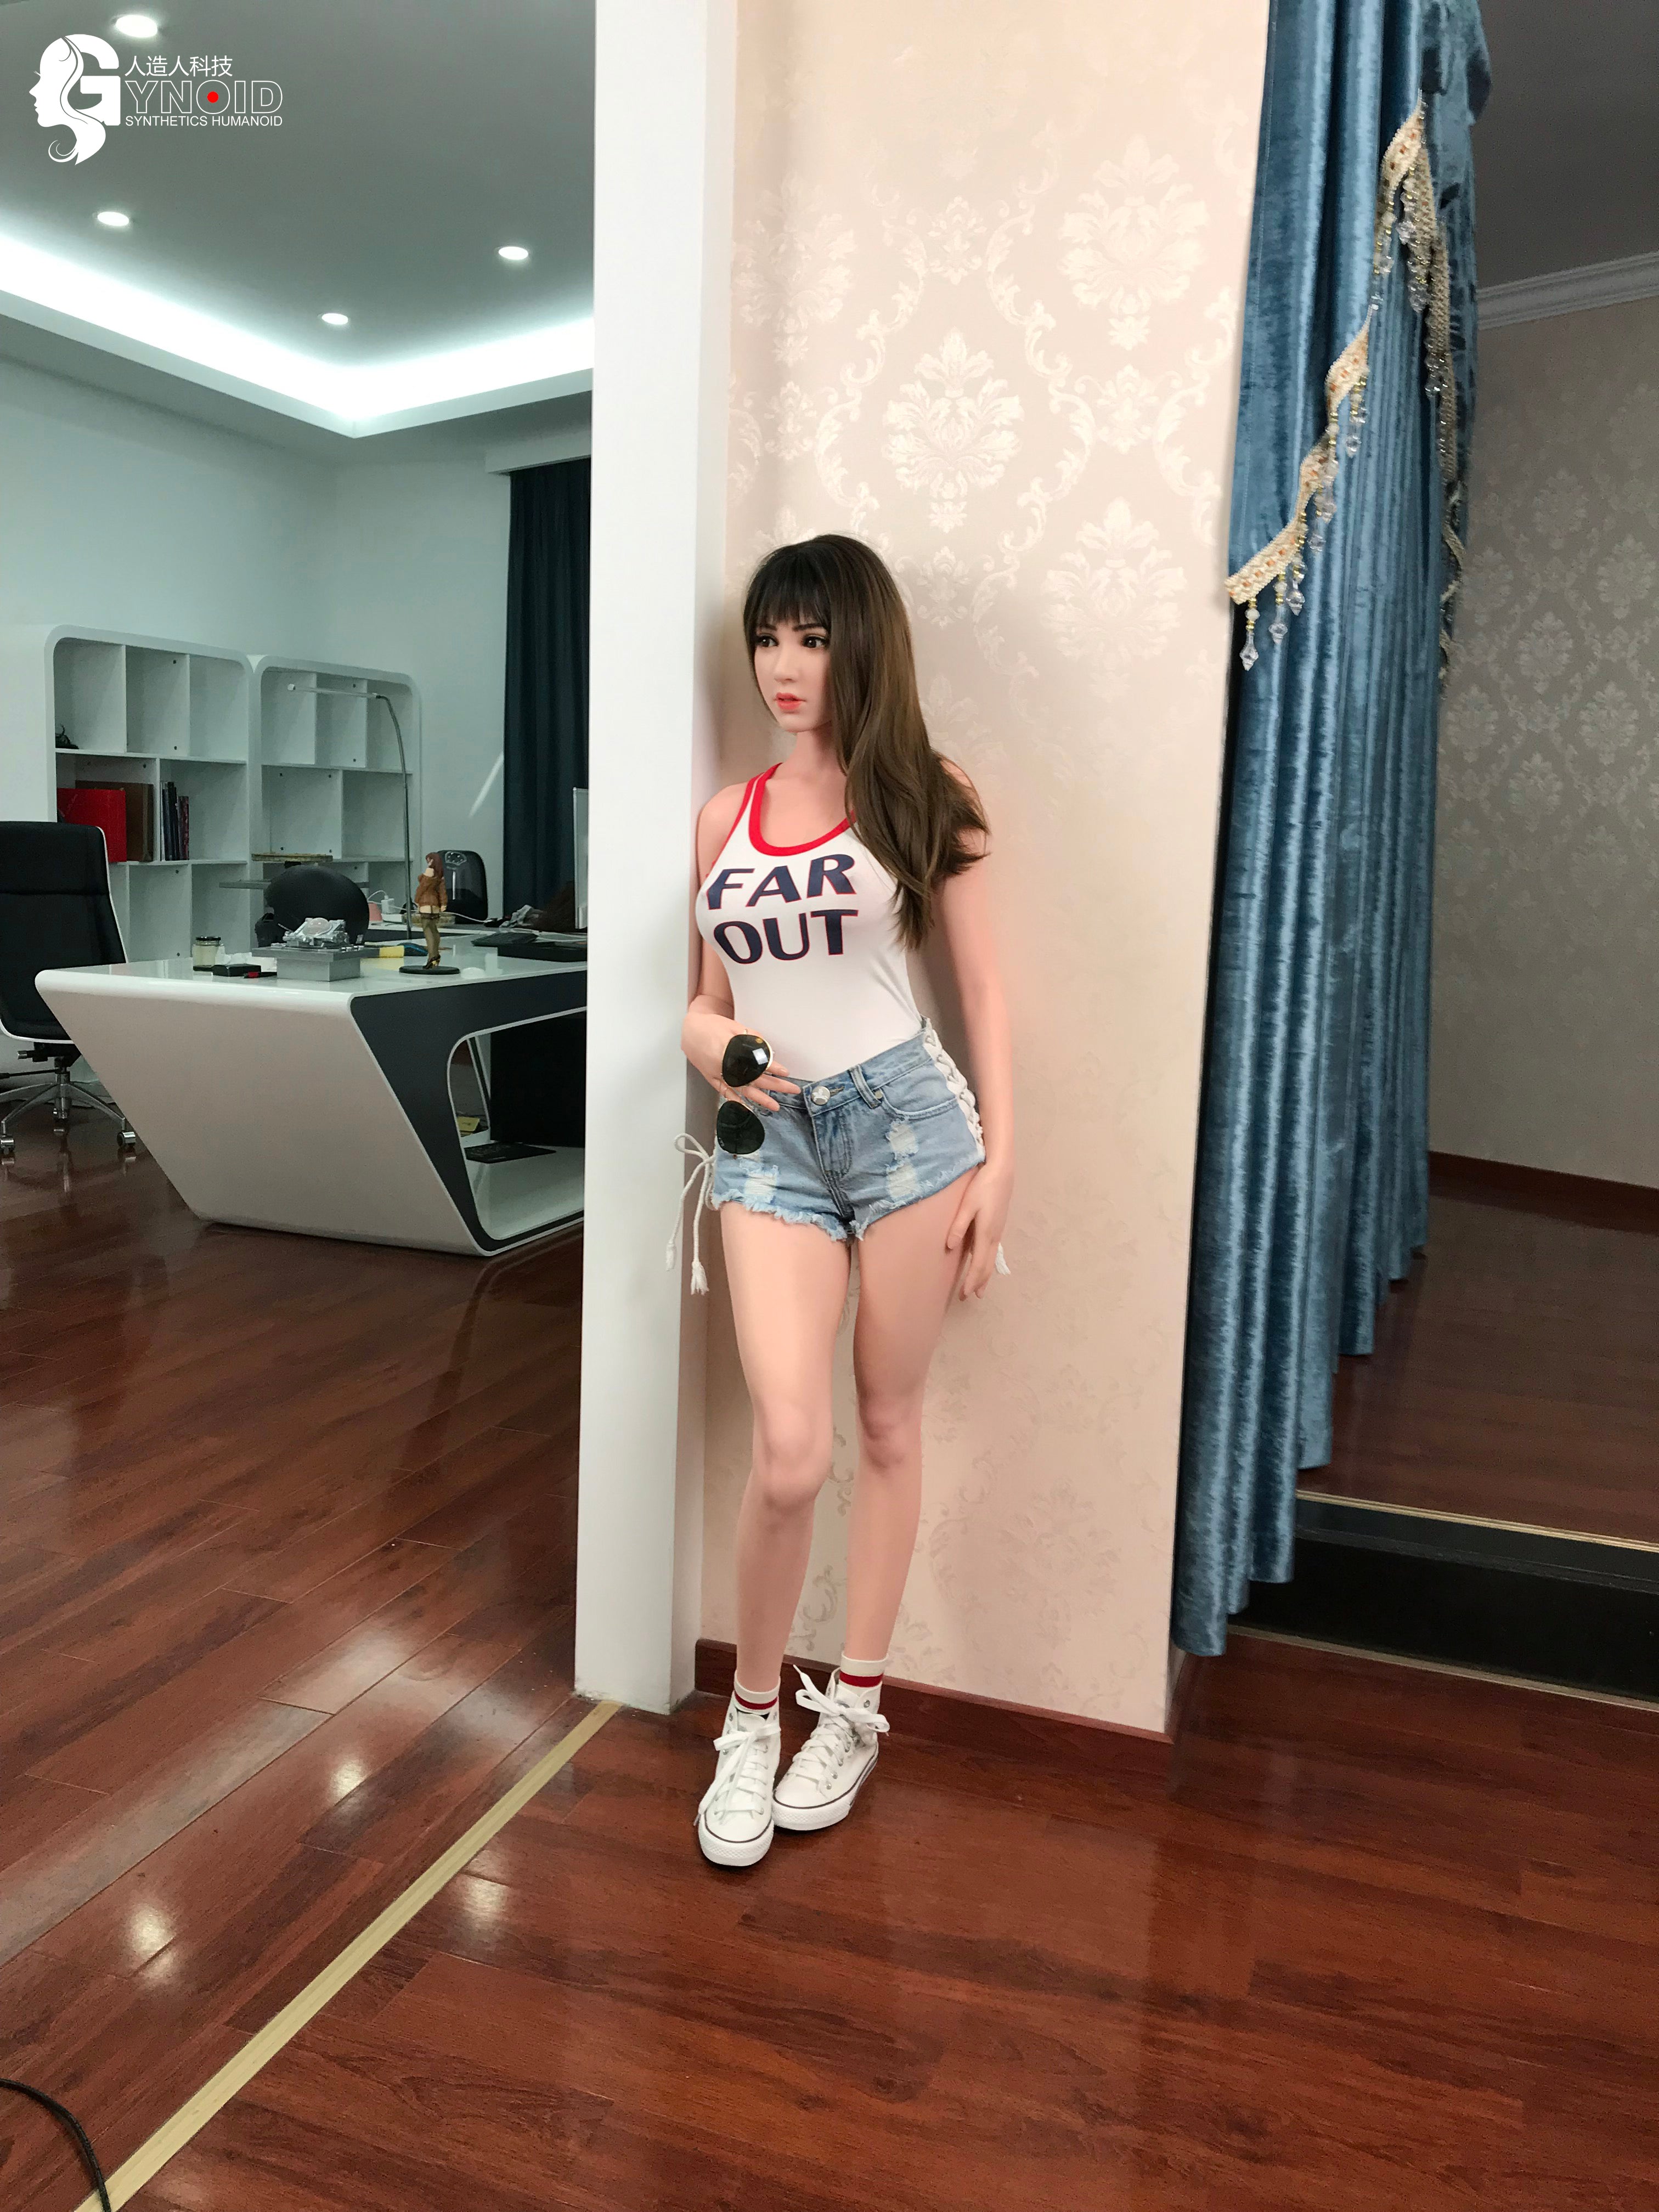 Gynoid Doll 155 cm Silicone - Shay | Buy Sex Dolls at DOLLS ACTUALLY